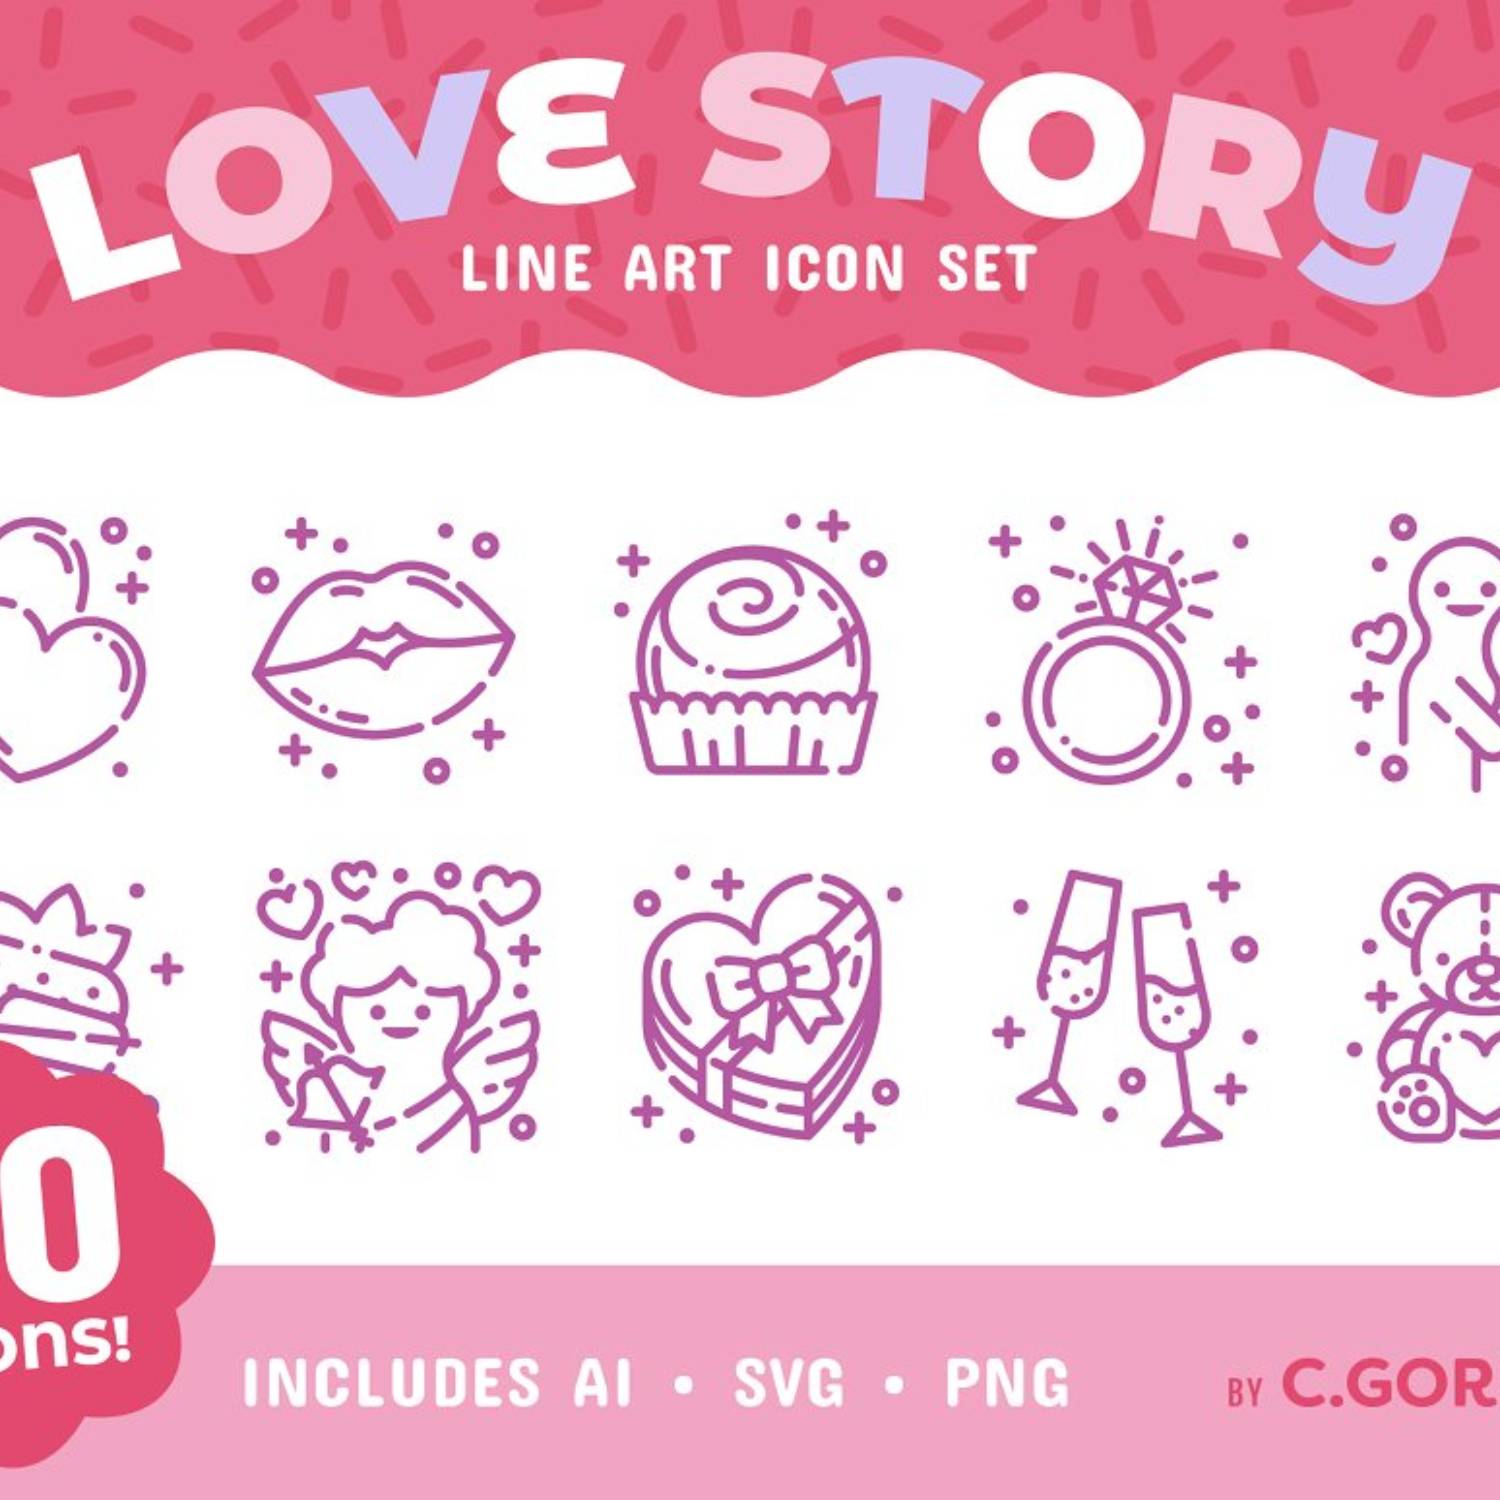 Love Story Line Art Icon Set Main Cover.